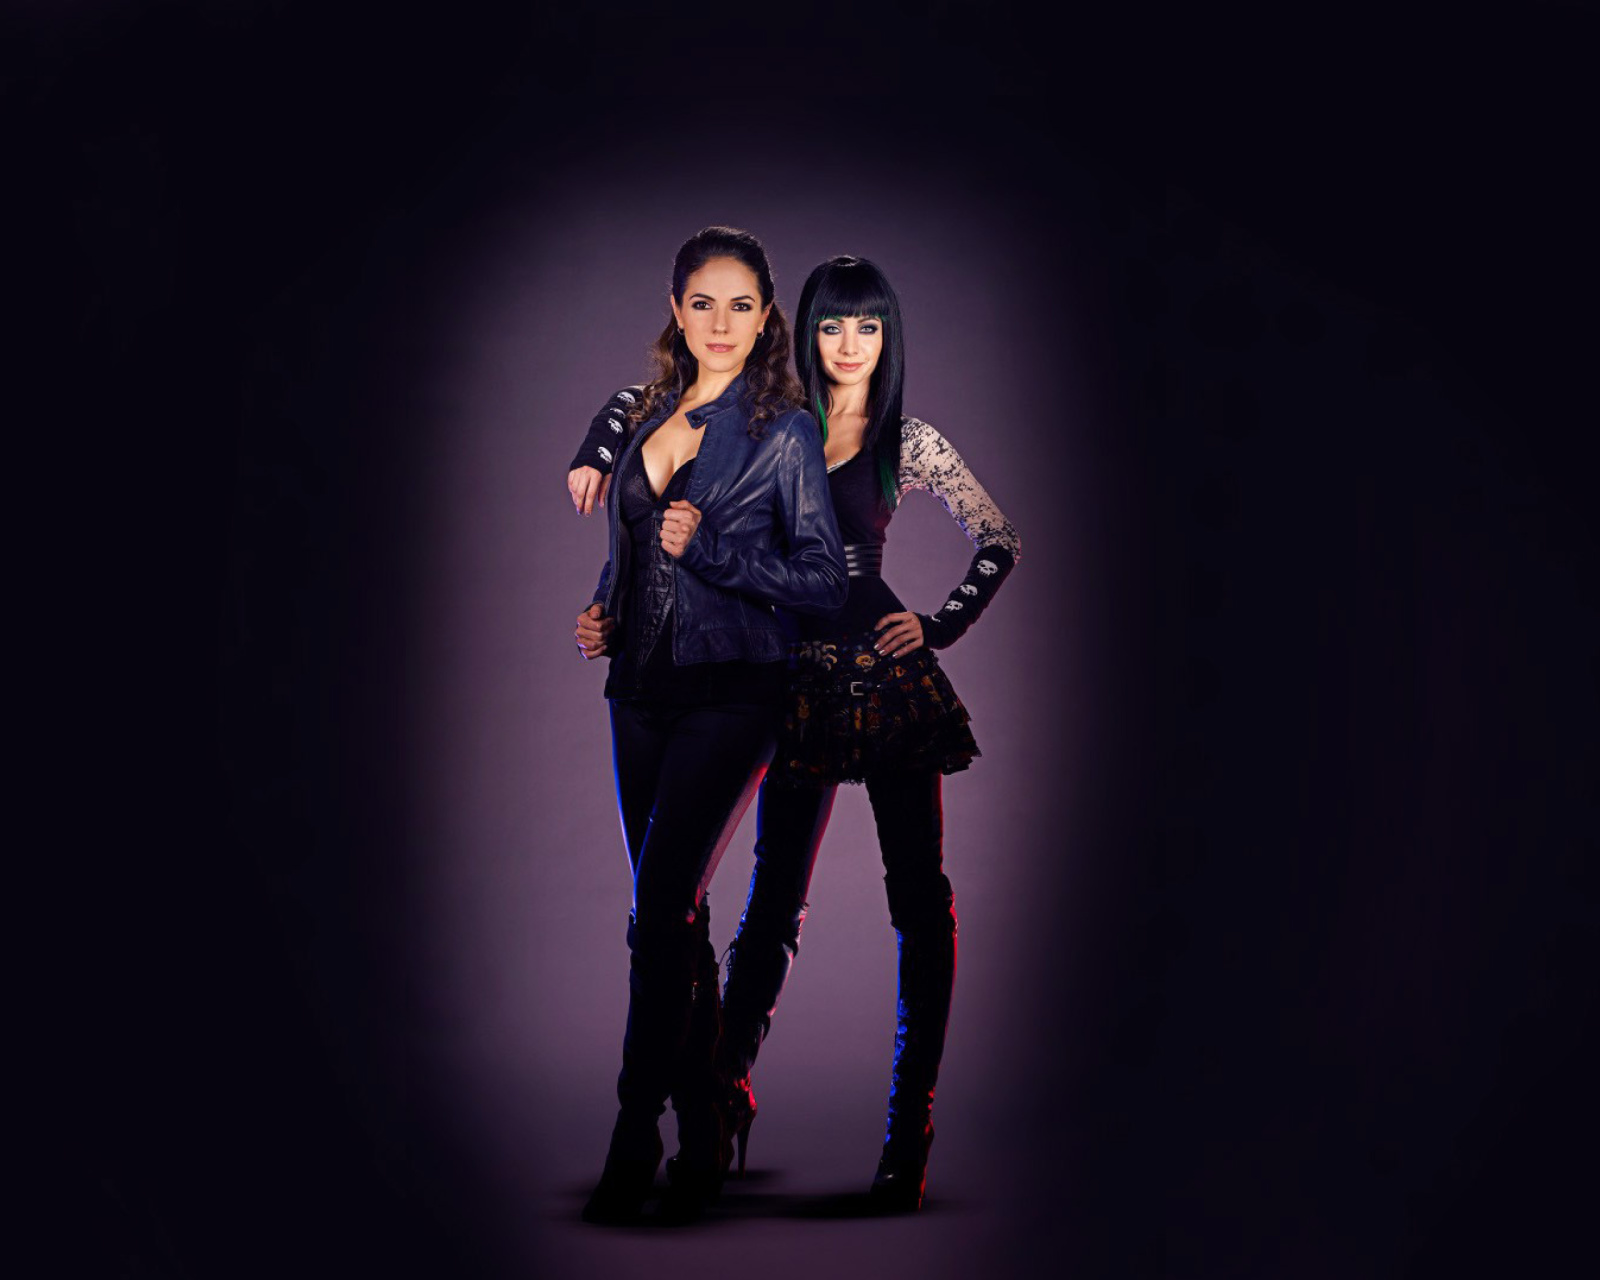 Lost Girl with Anna Silk and Ksenia Solo wallpaper 1600x1280